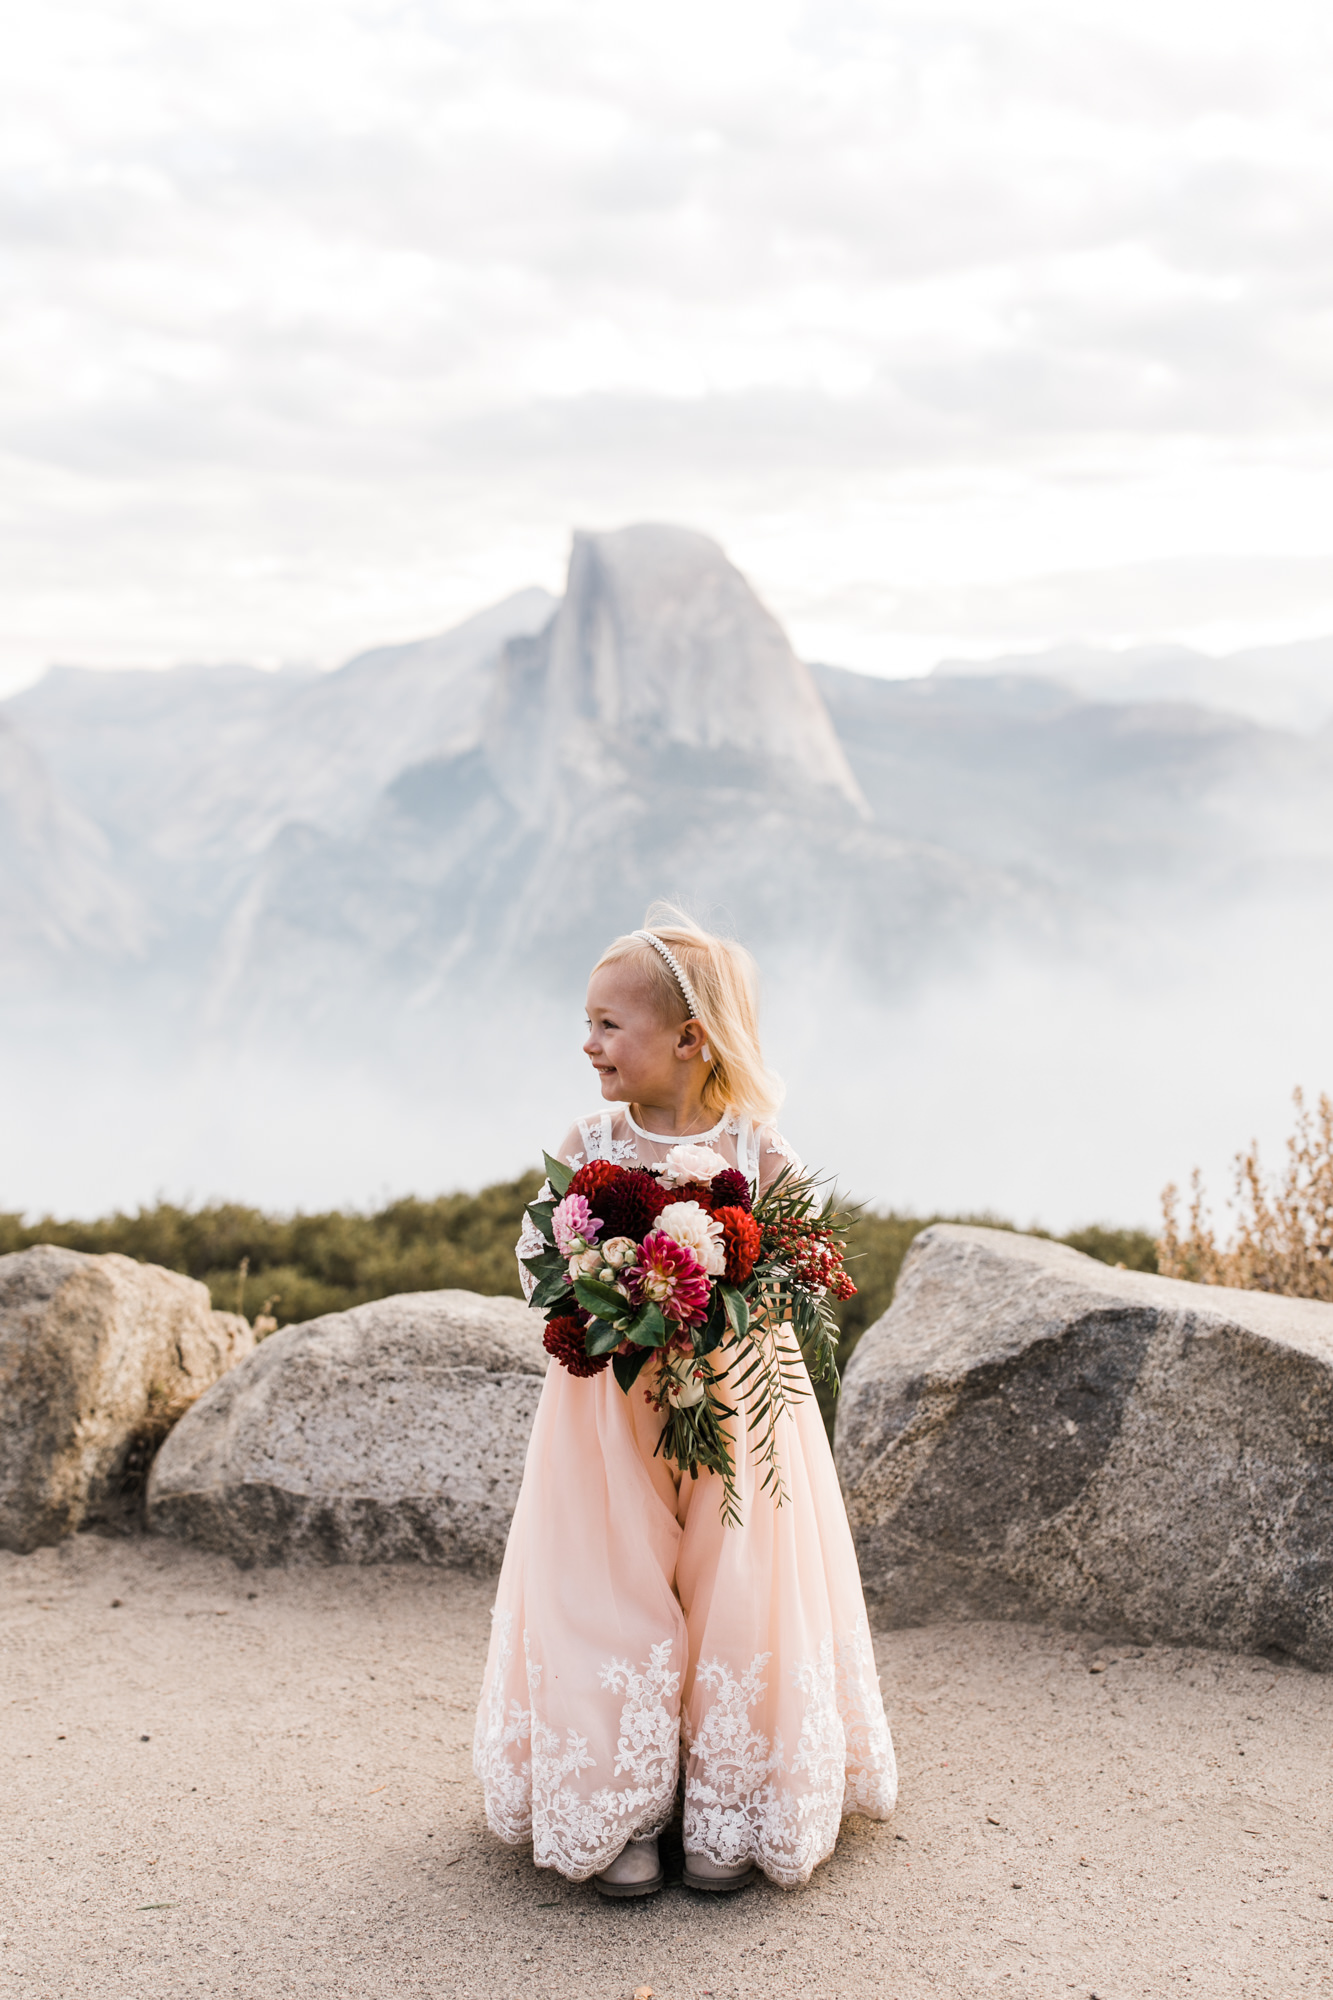 intimate wedding at glacier point | yosemite national park | destination wedding photographer | the hearnes adventure photography | www.thehearnes.com